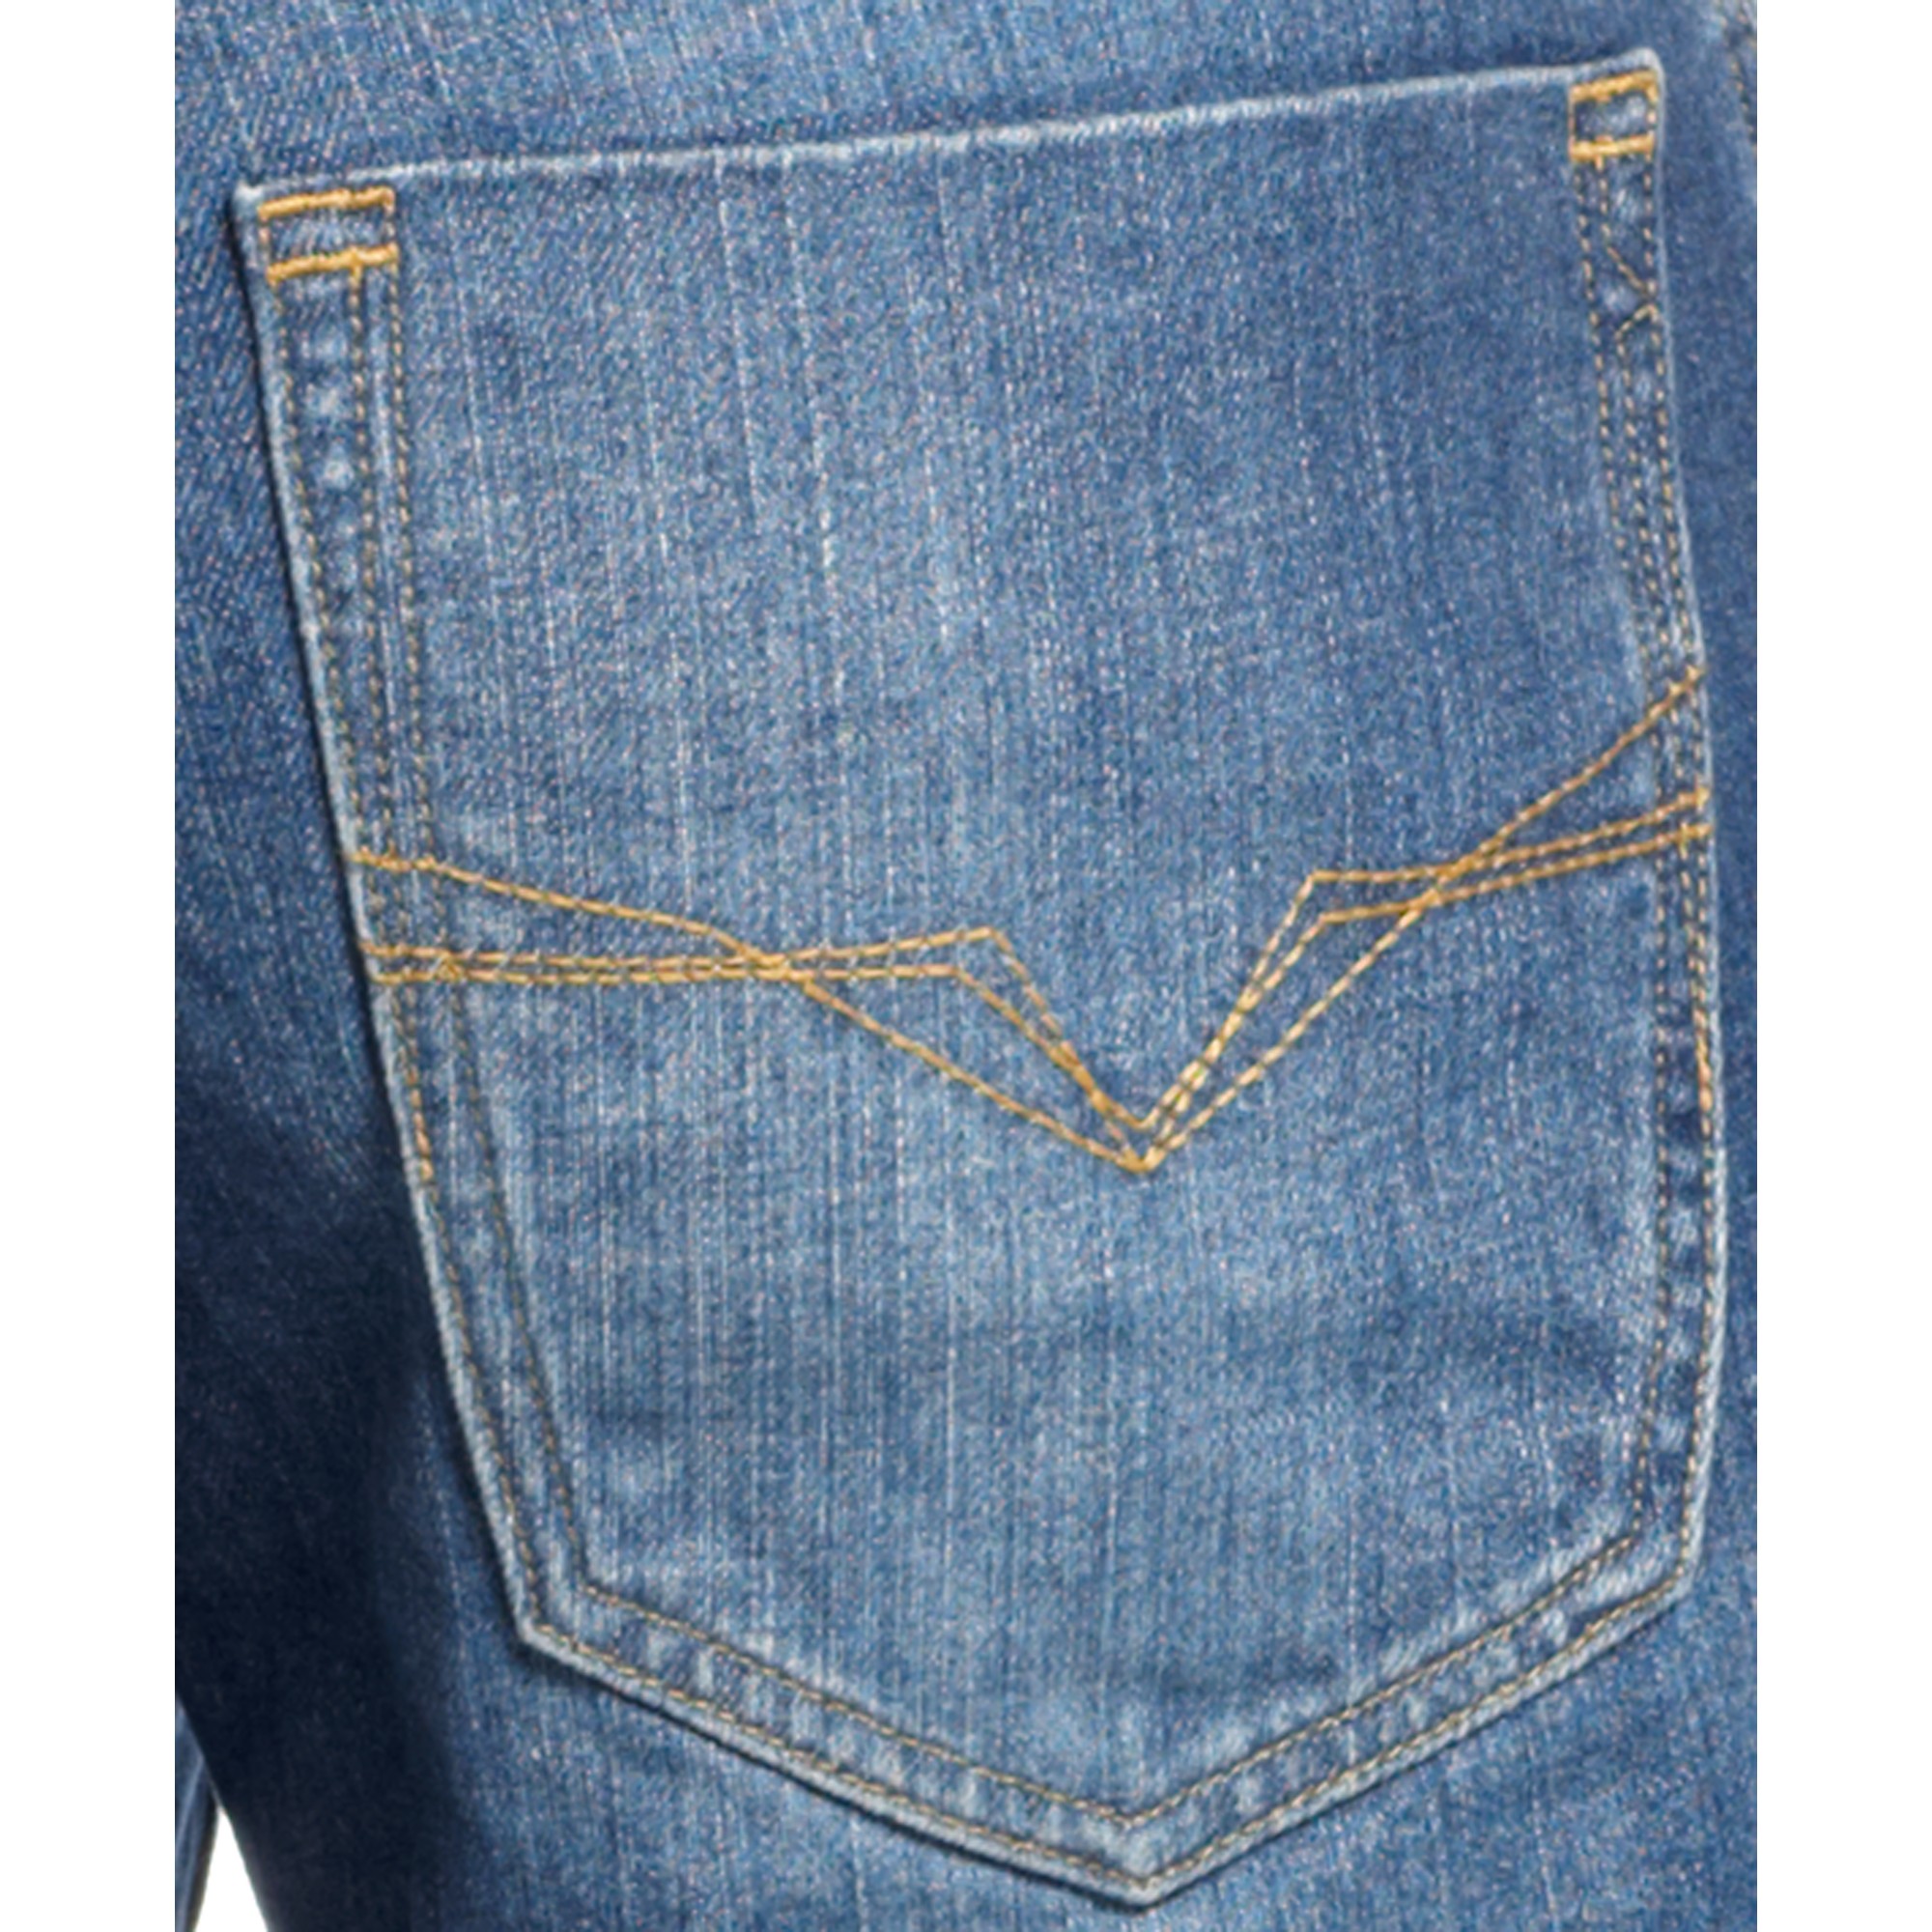 Lyst - Guess Desmond Relaxed Fit Jeans in Blue for Men